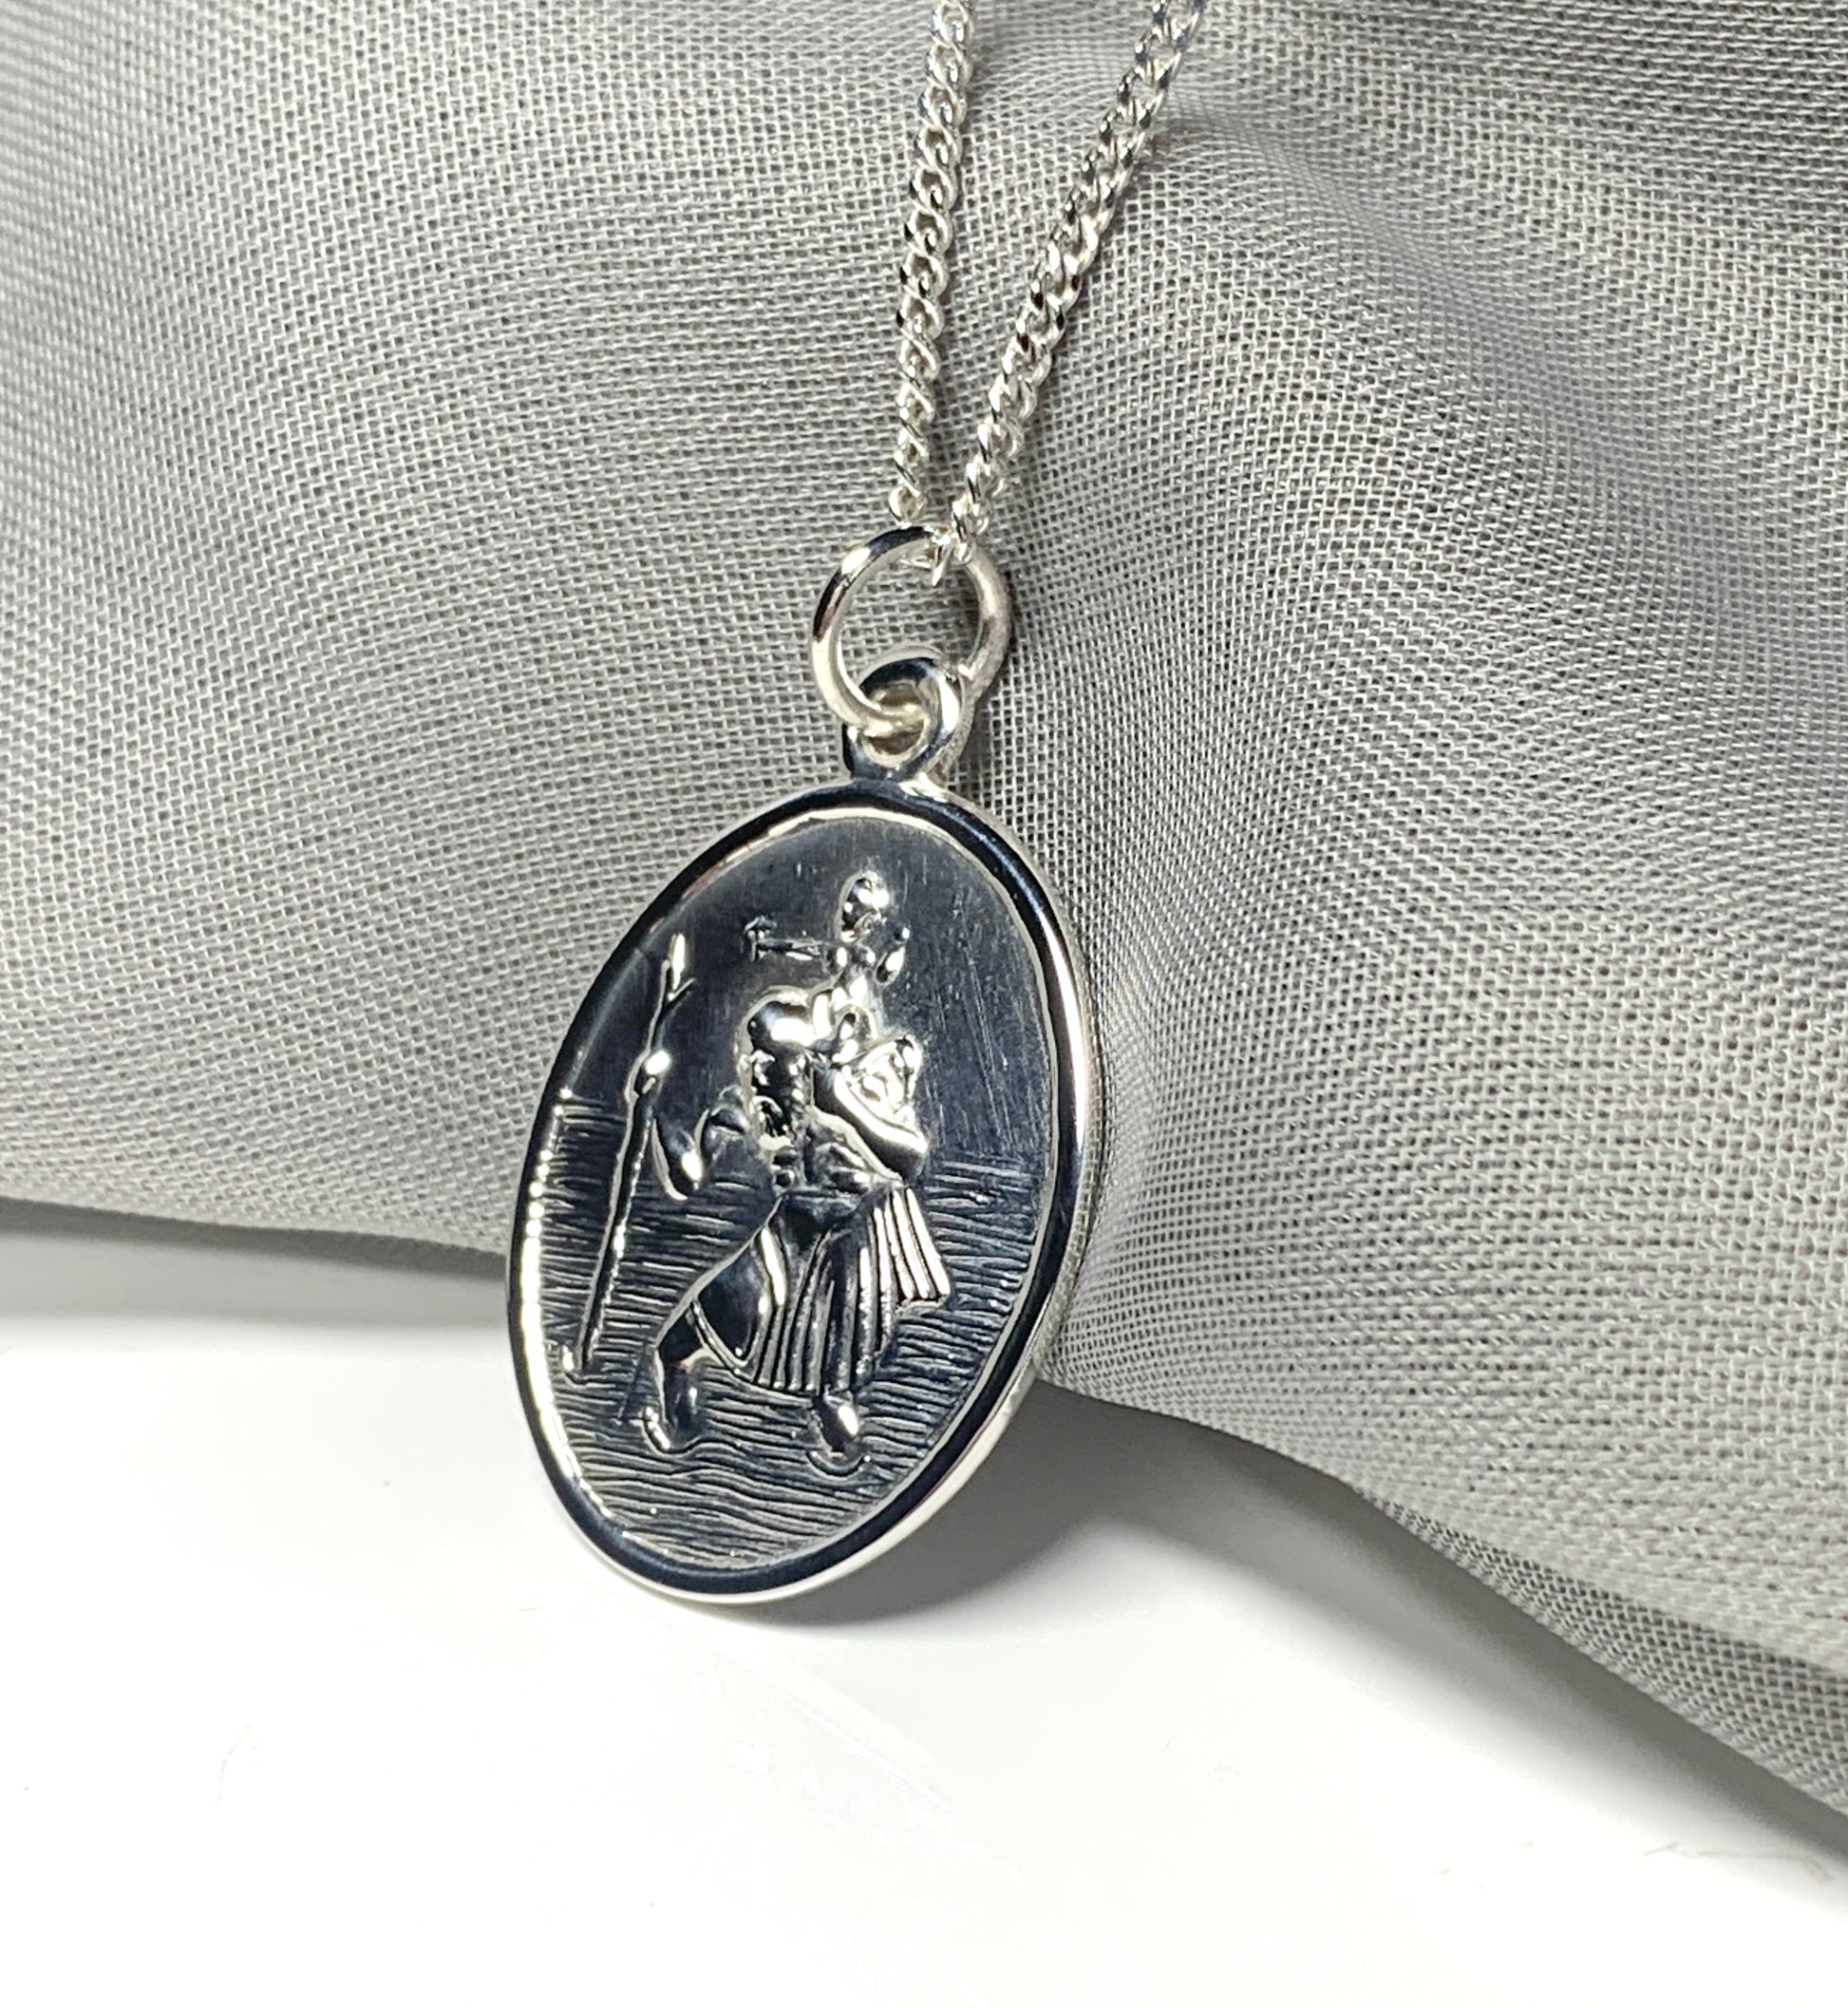 Large sterling silver solid oval St. Christopher